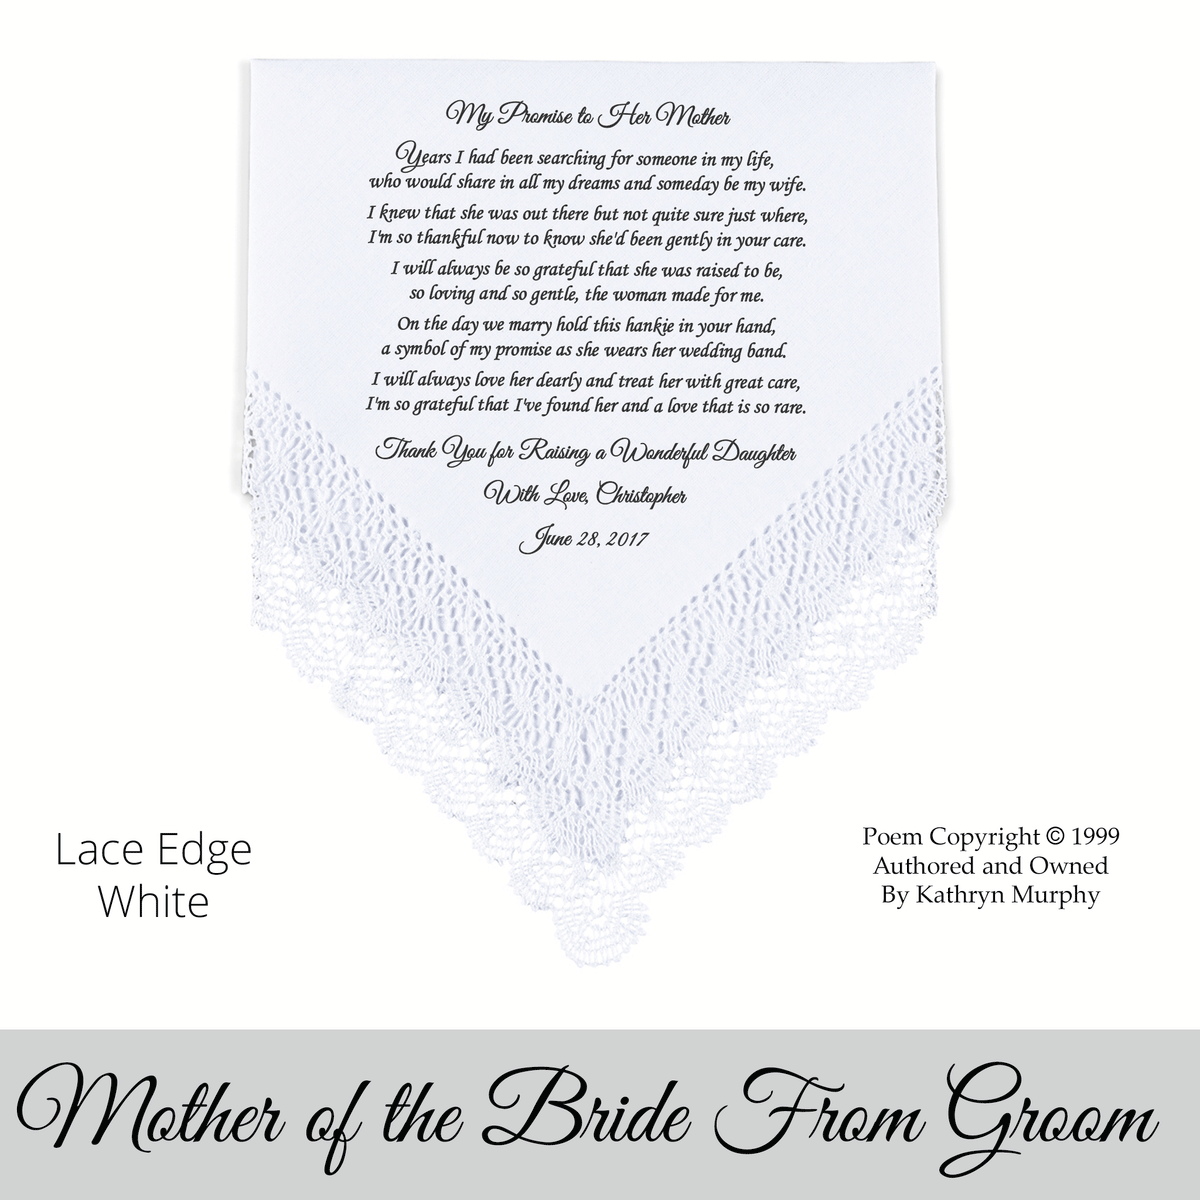 Mother of the Bride wedding hankie gift from the bride poem printed wedding hankie